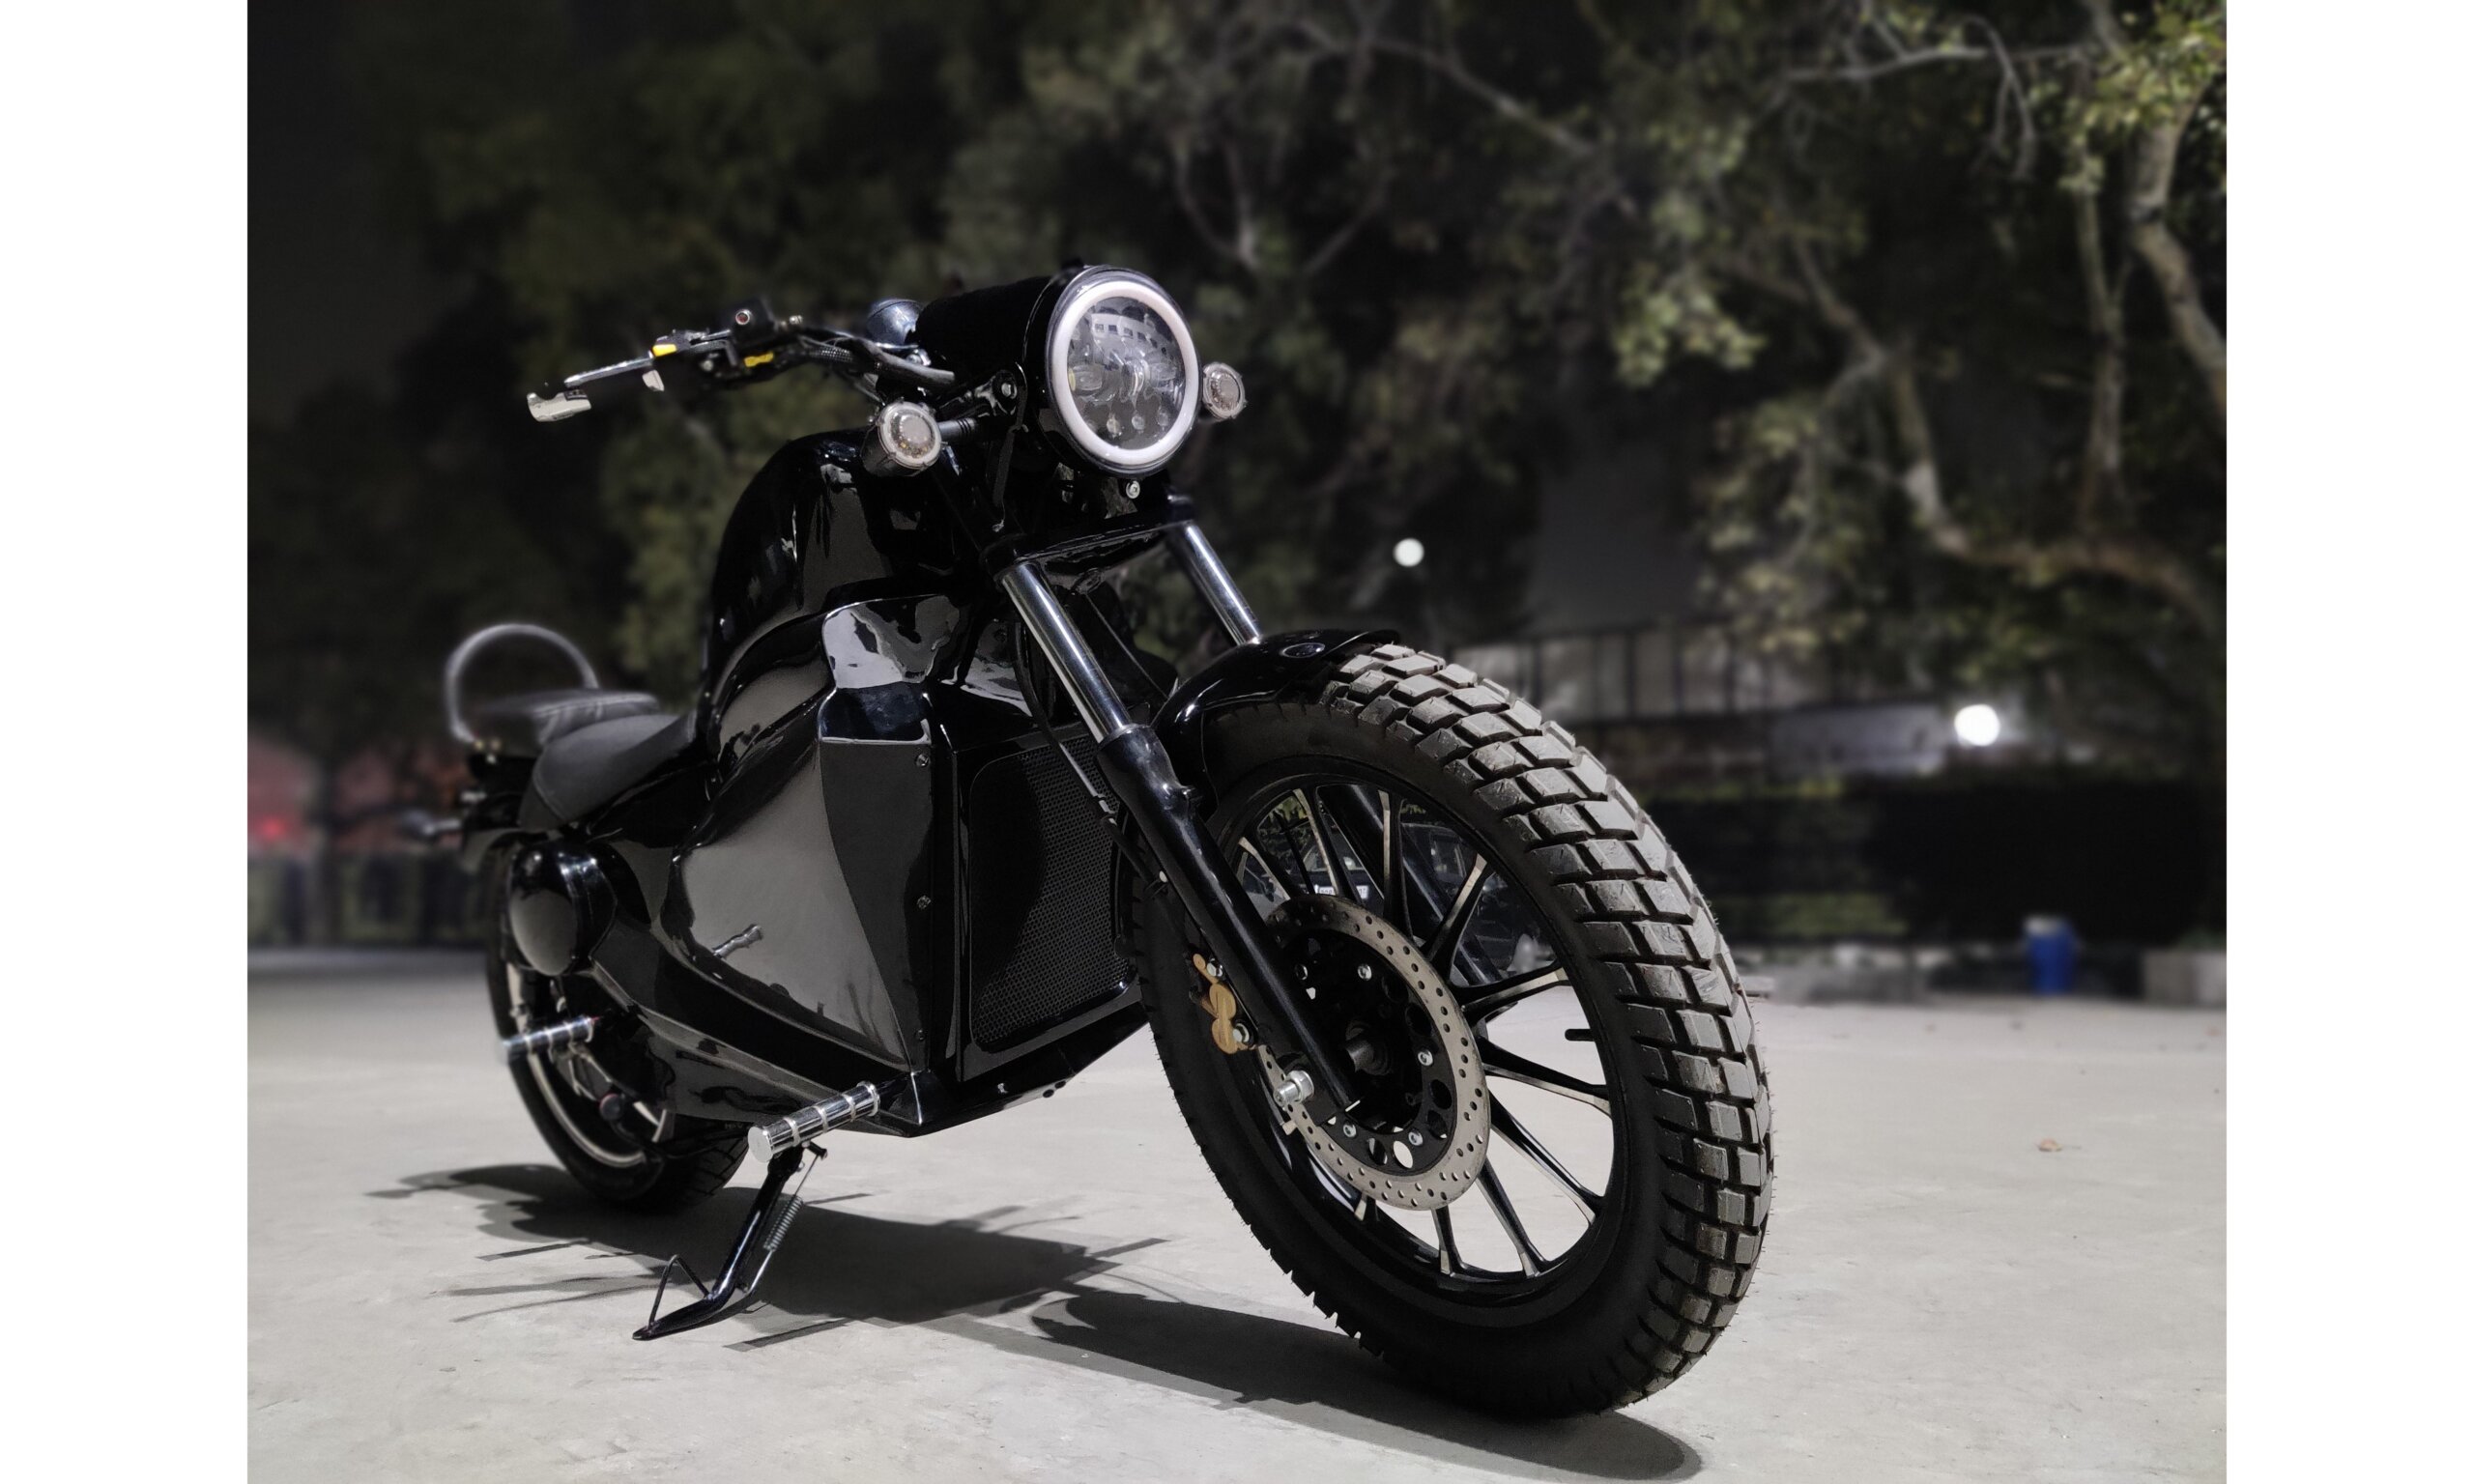 Mazout hypes its inaugural EV as India’s first electric cruiser bike